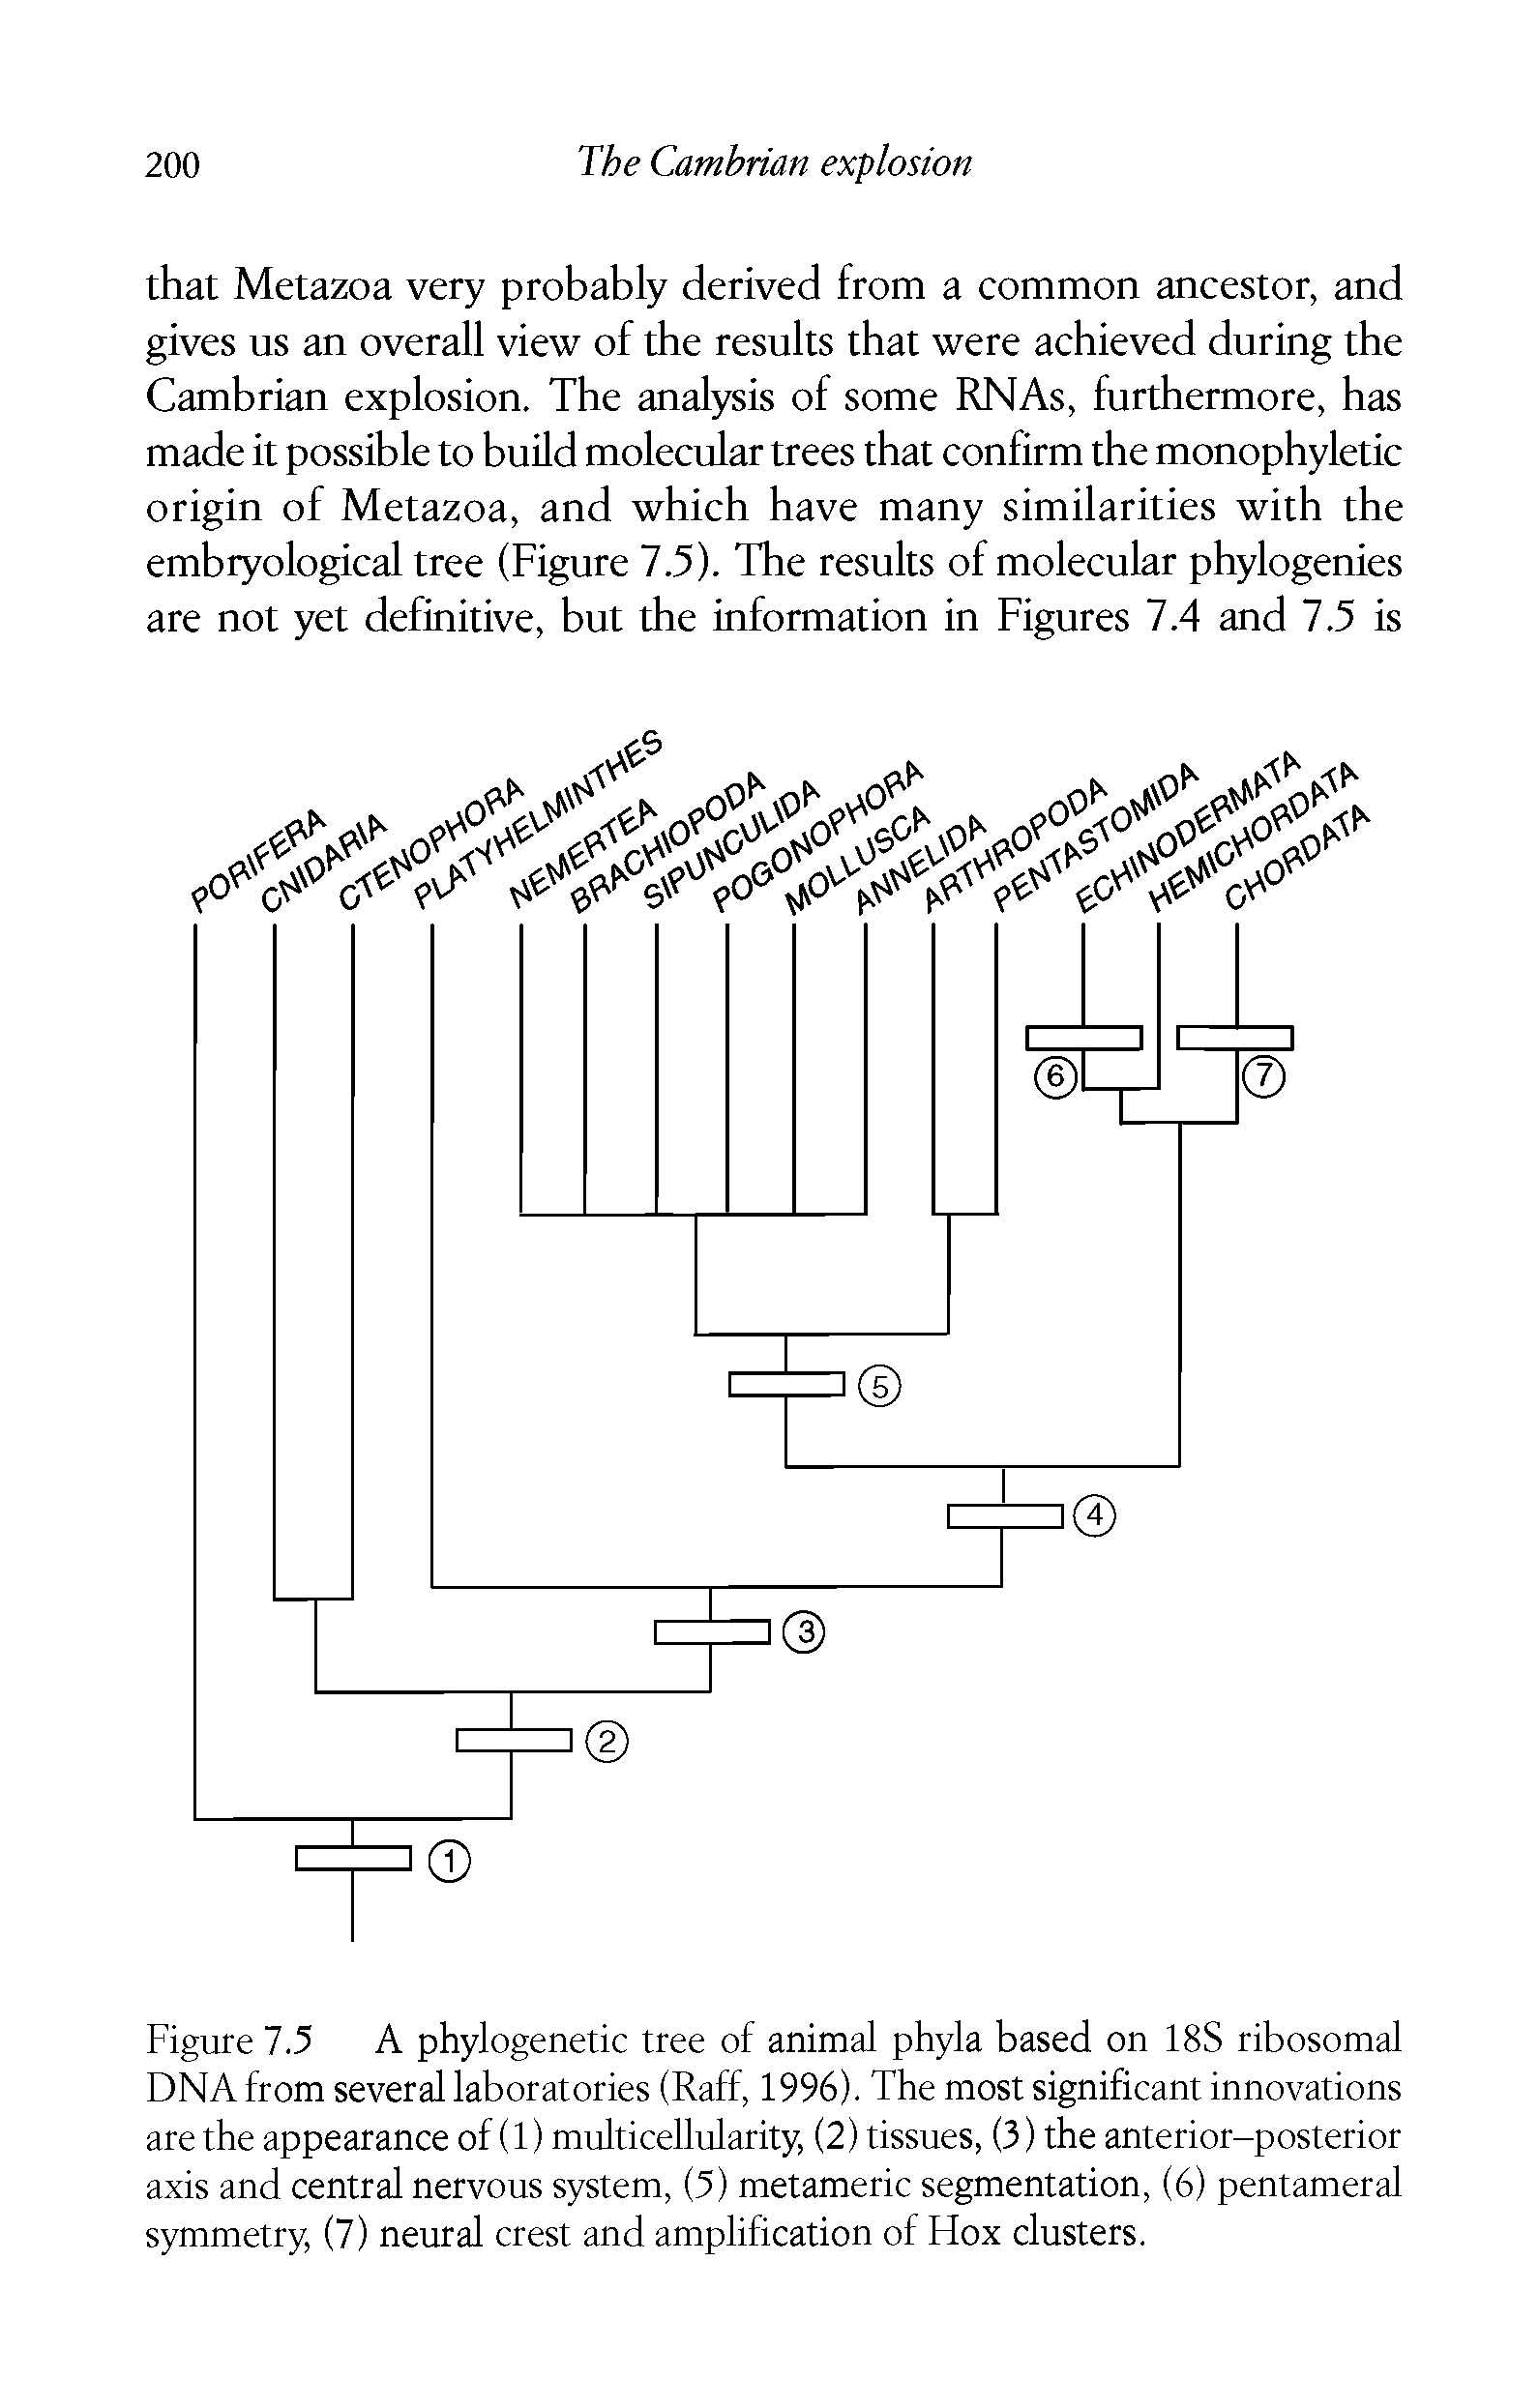 Figure 7.5 A phylogenetic tree of animal phyla based on 18S ribosomal DNA from several laboratories (Raff, 1996). The most significant innovations are the appearance of (1) multicellularity, (2) tissues, (3) the anterior-posterior axis and central nervous system, (5) metameric segmentation, (6) pentameral symmetry, (7) neural crest and amplification of Hox clusters.